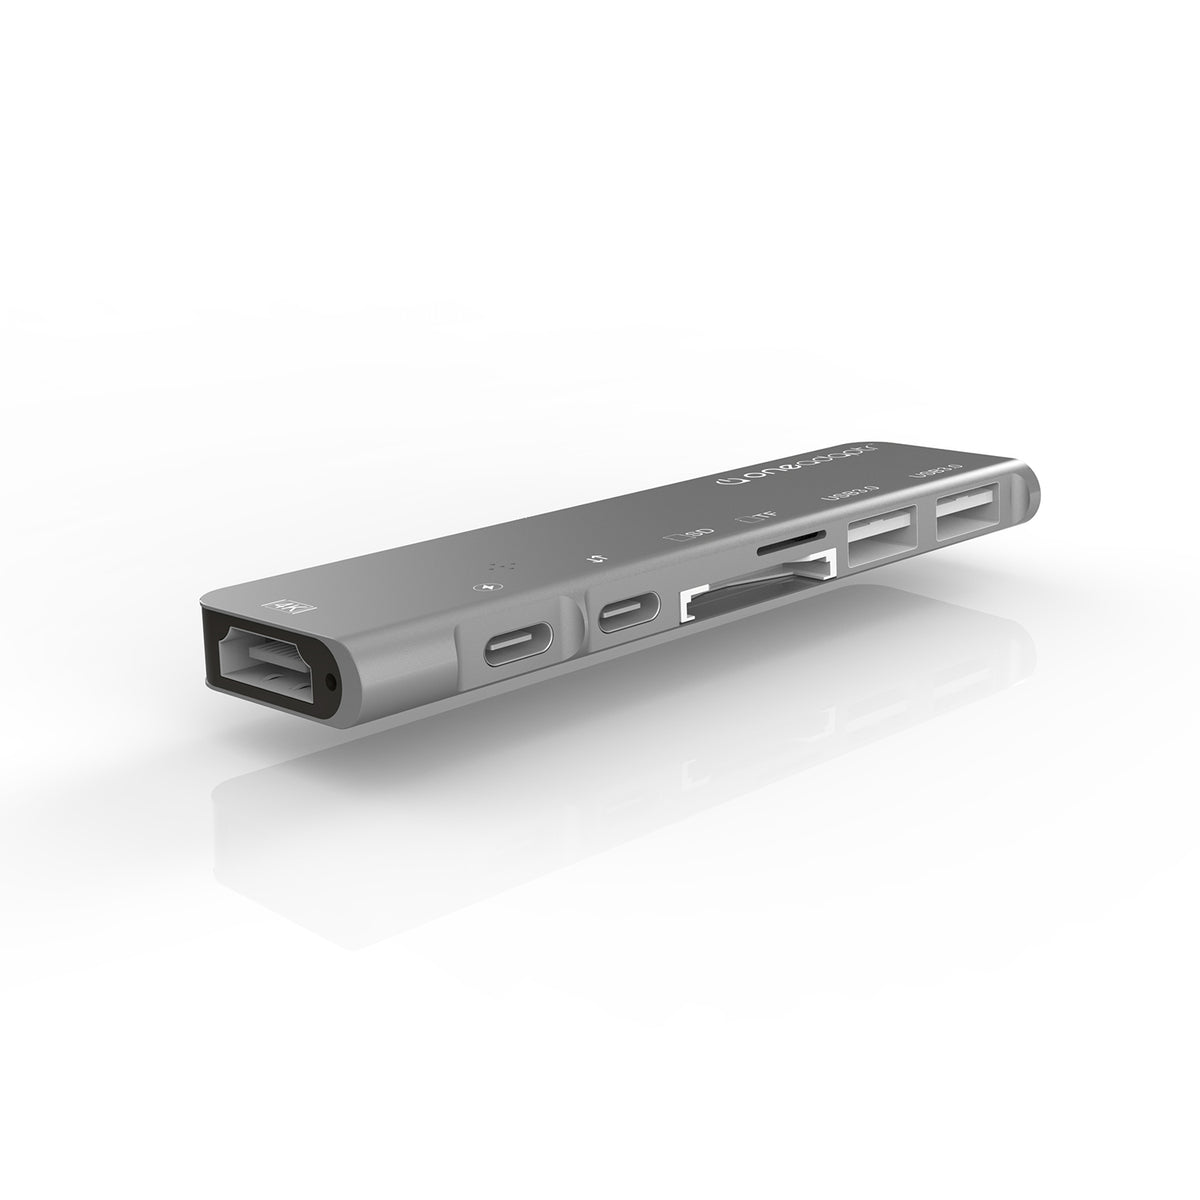 EVRI PRO USB-C 7-In-1 Hub for MacBook Pro 13" & 15" and MacBook Air with 4K HDMI